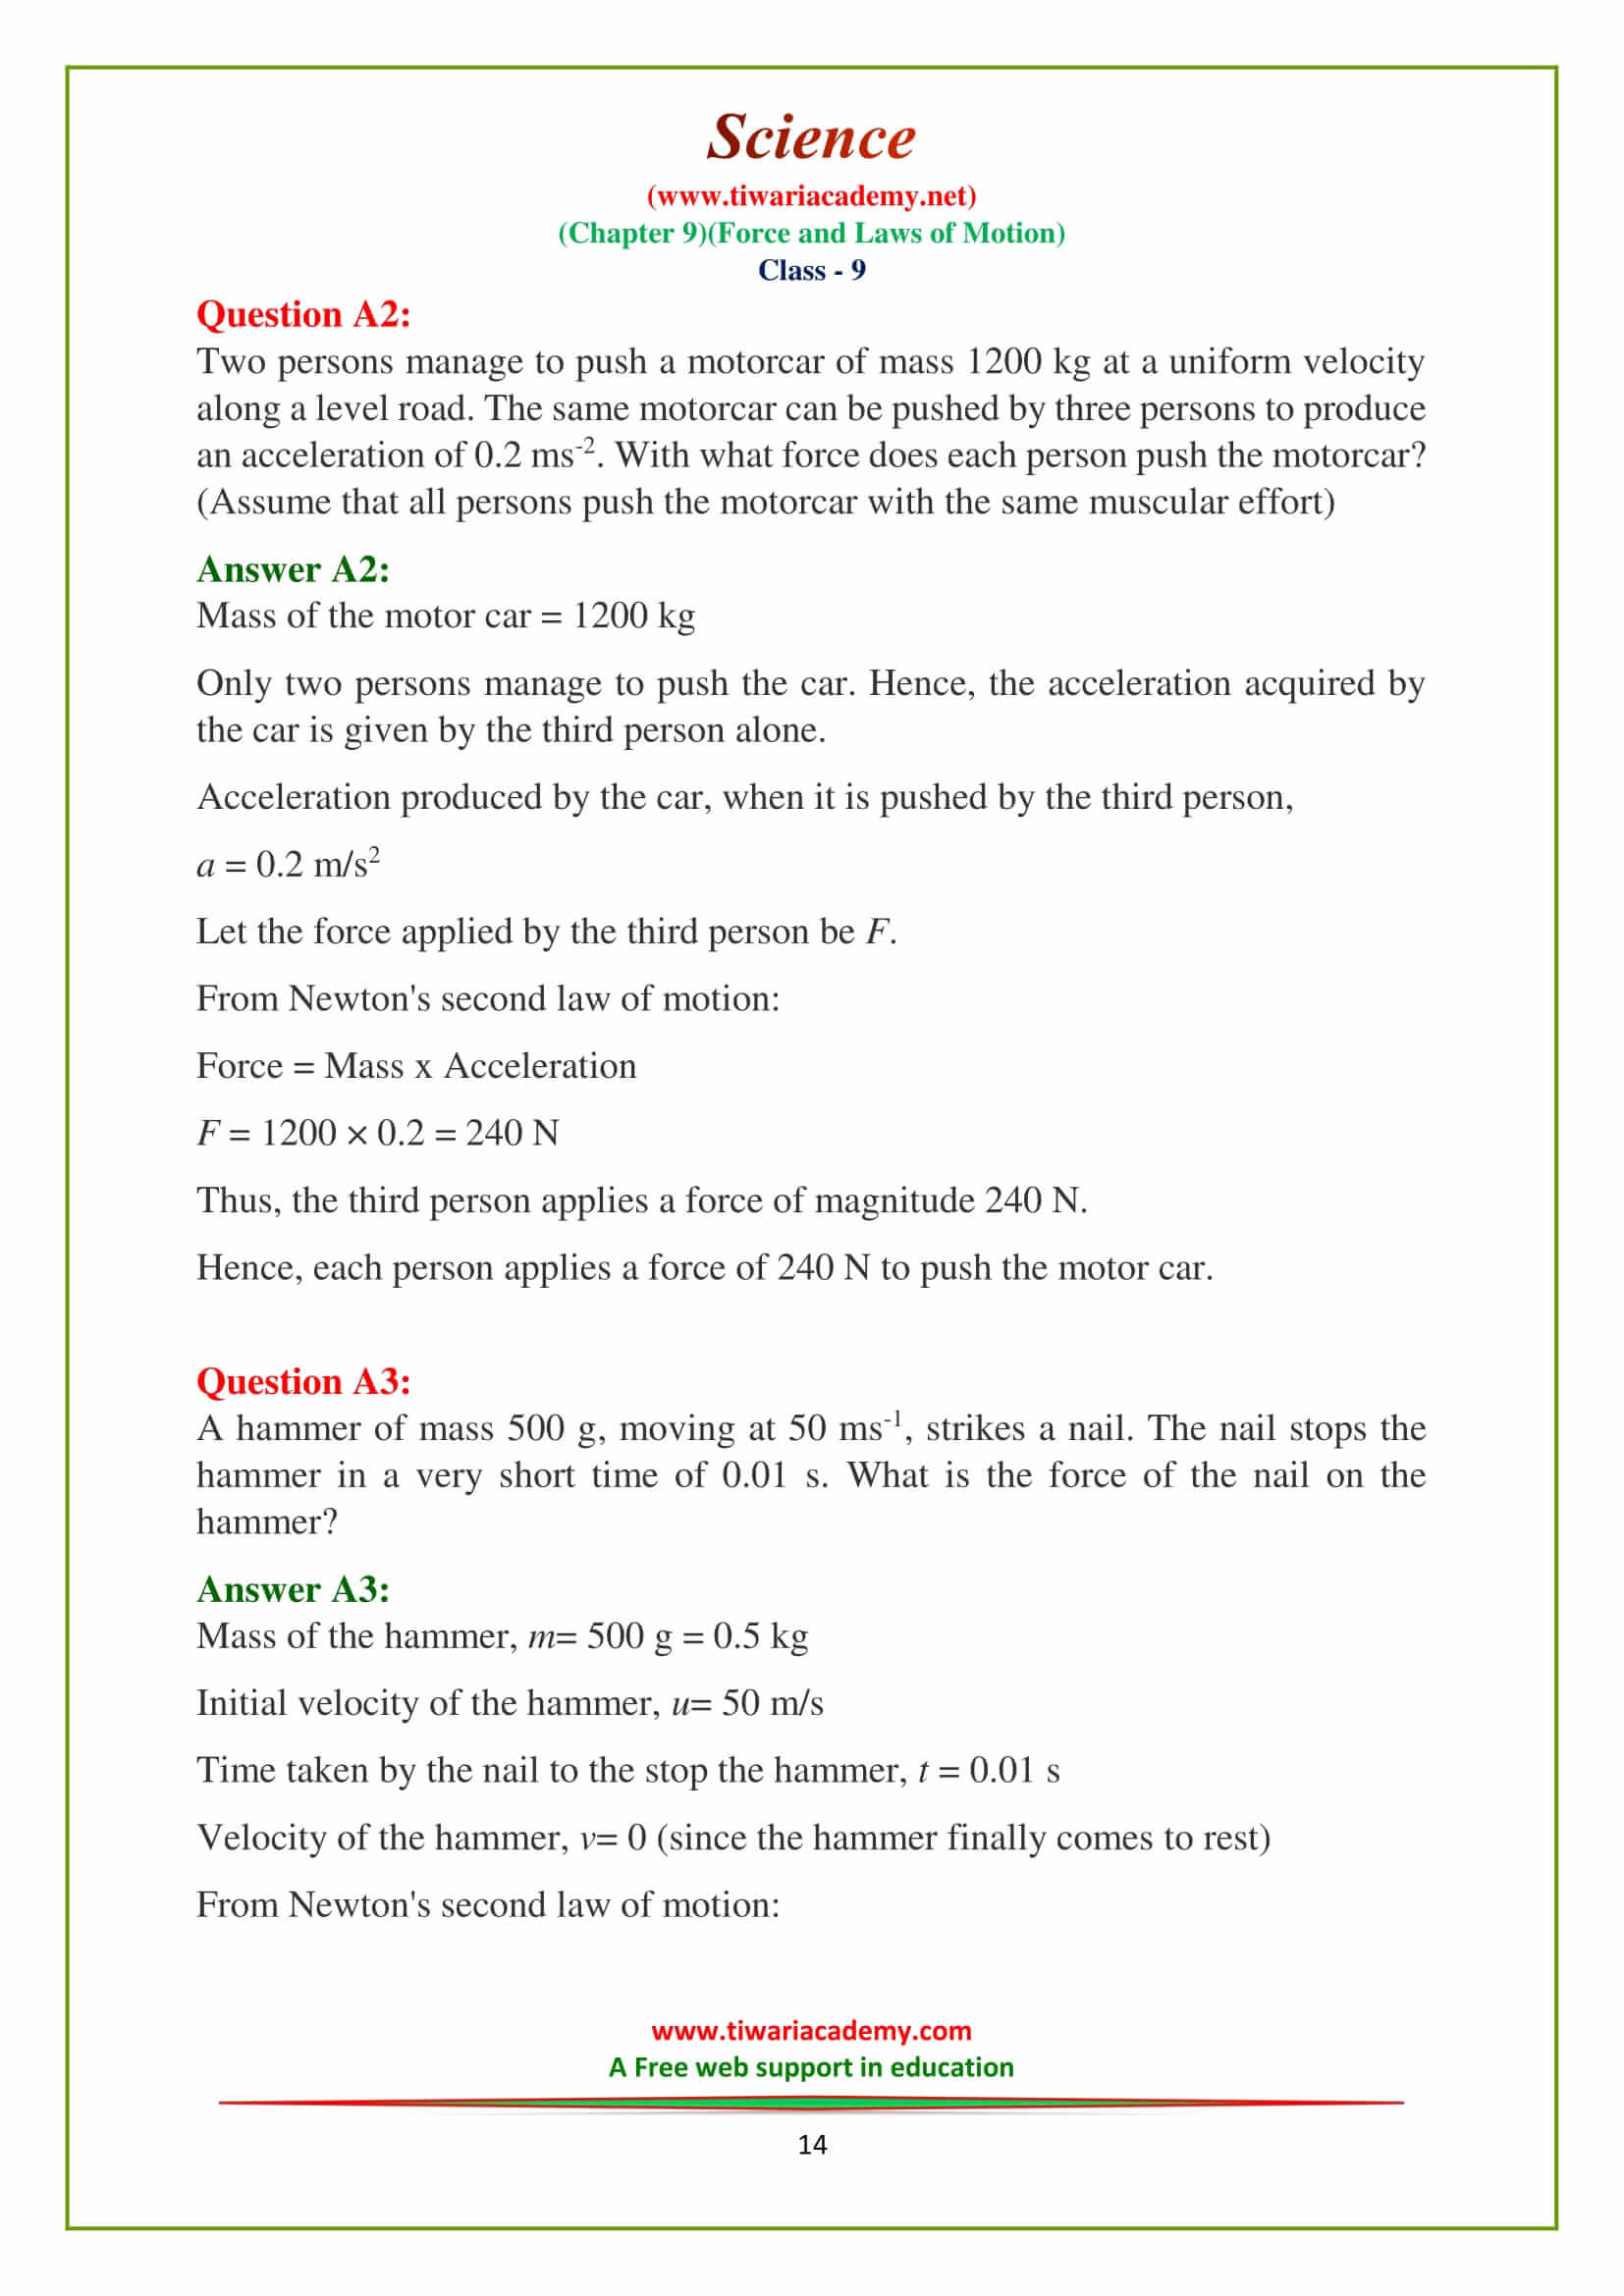 9 force and laws of motion Additional exercises question answers in pdf form